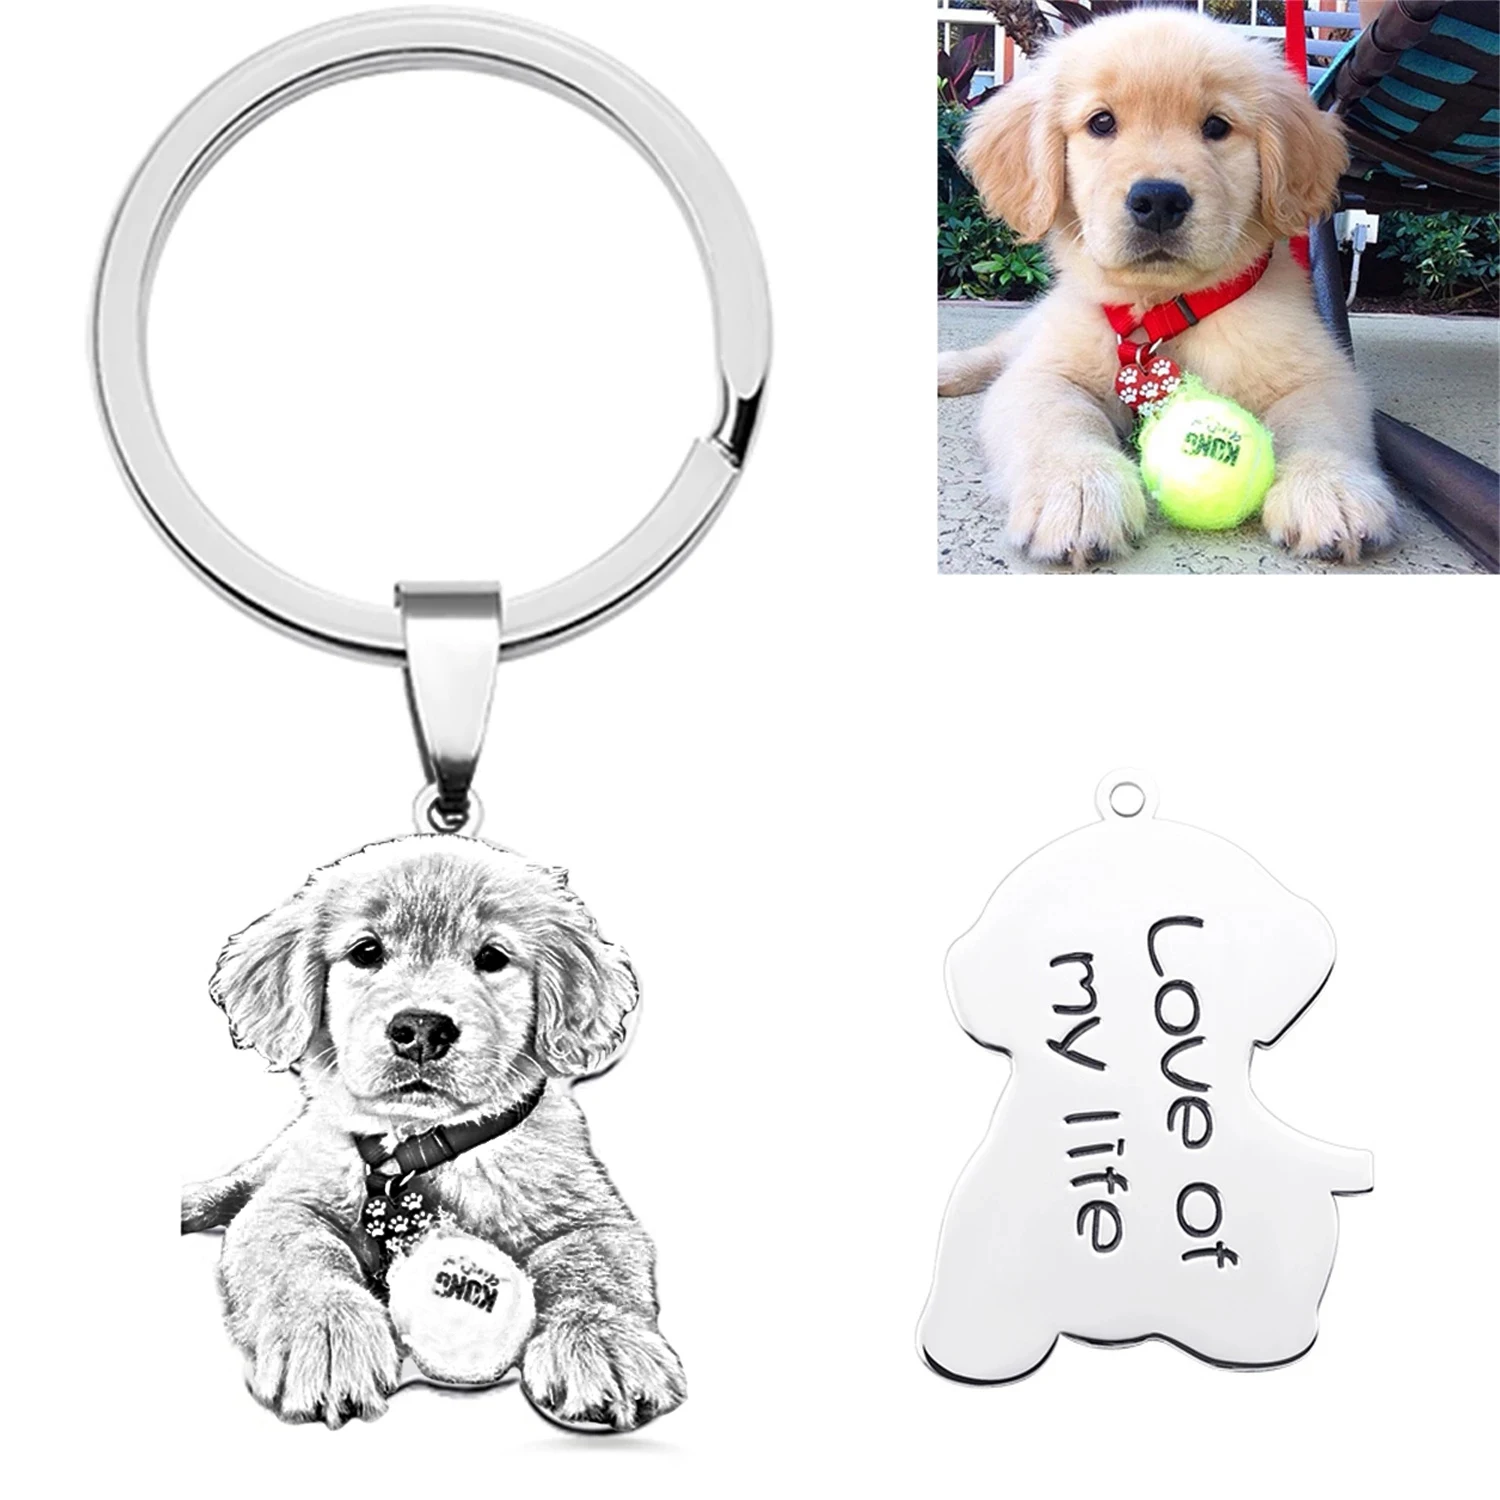 Dascusto Customized Pet Photo Keychain Stainless Steel Dog Tag Key Chain For Memorial Best Gift Personalized Pet Animal Keyring 4pcs stainless steel mini animal cake molds